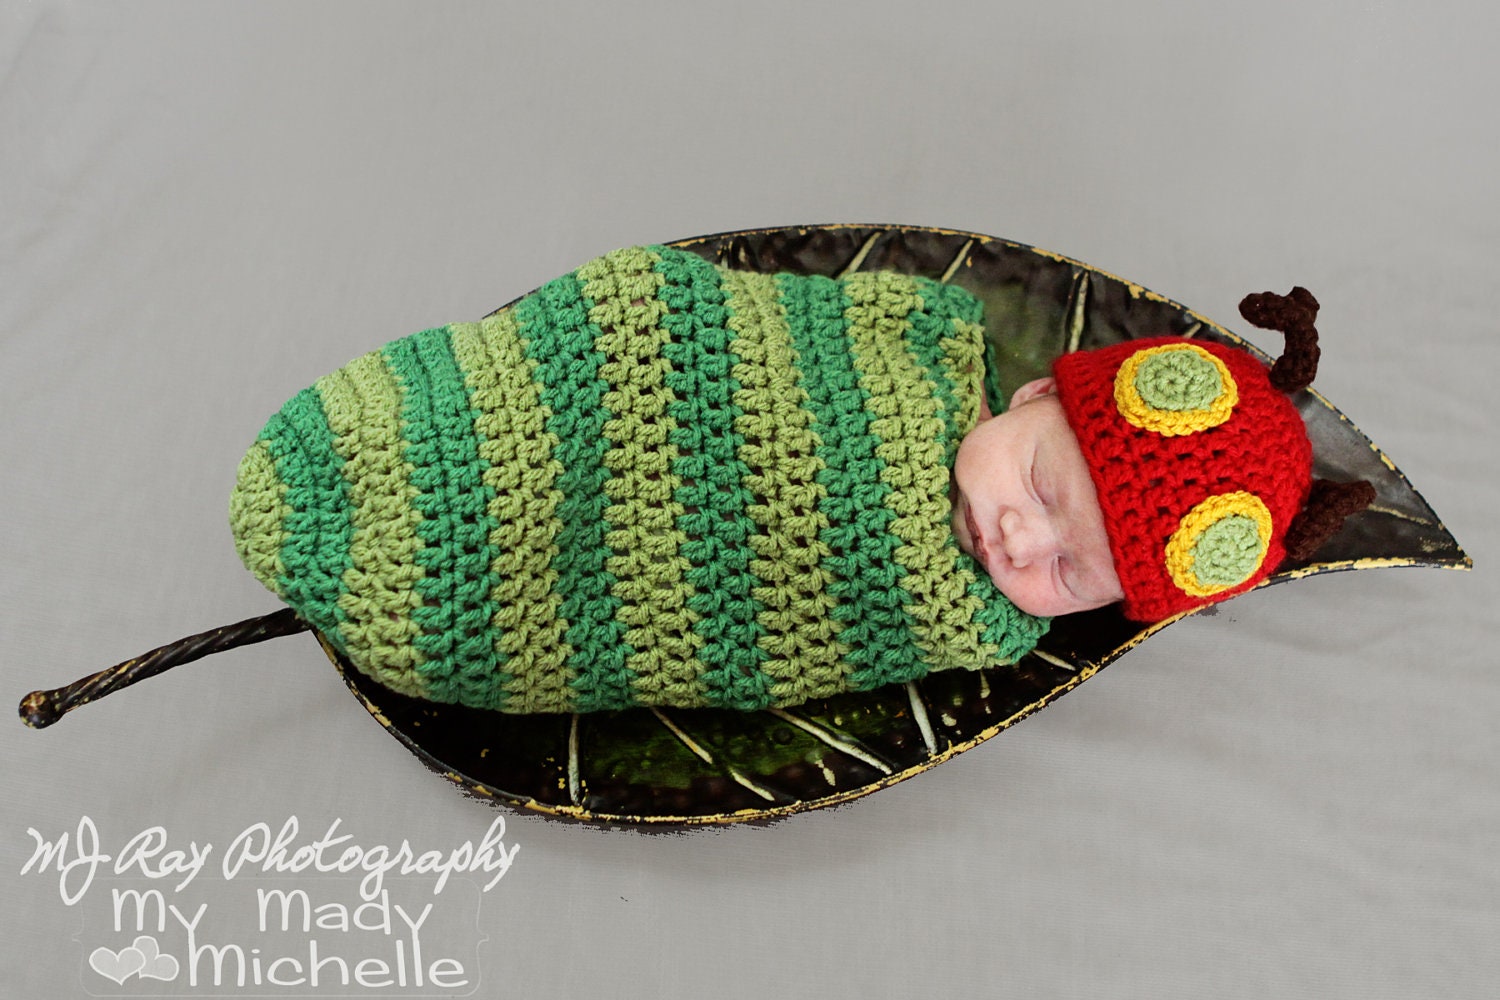 Hungry Caterpillar Newborn Halloween Costume or Infant Photoraphy Prop Green and Red Bug - mymadymichelle